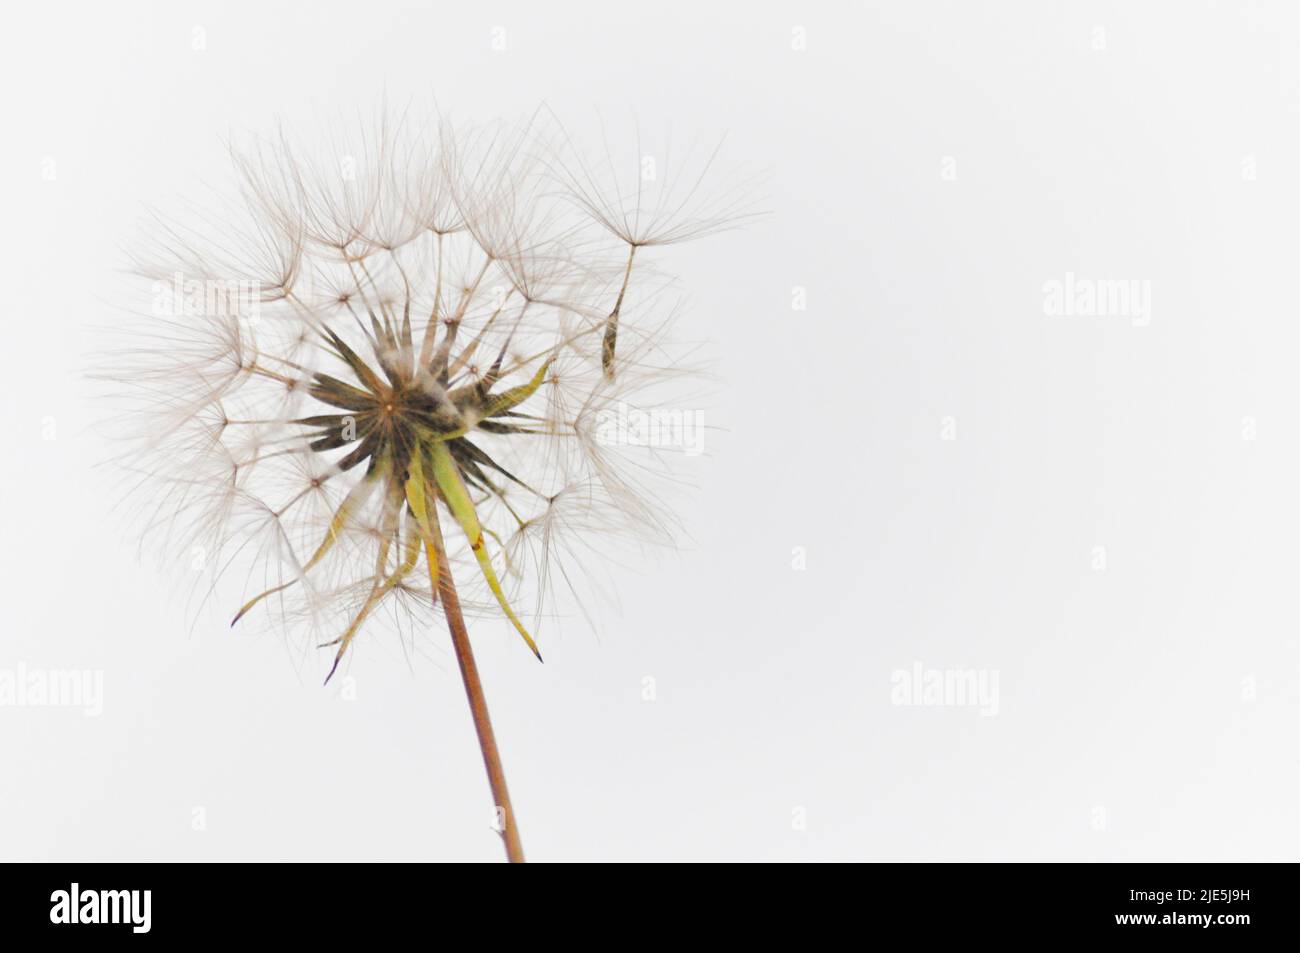 A single dandelion clock set against a white background with one seed coming away from the clock Stock Photo